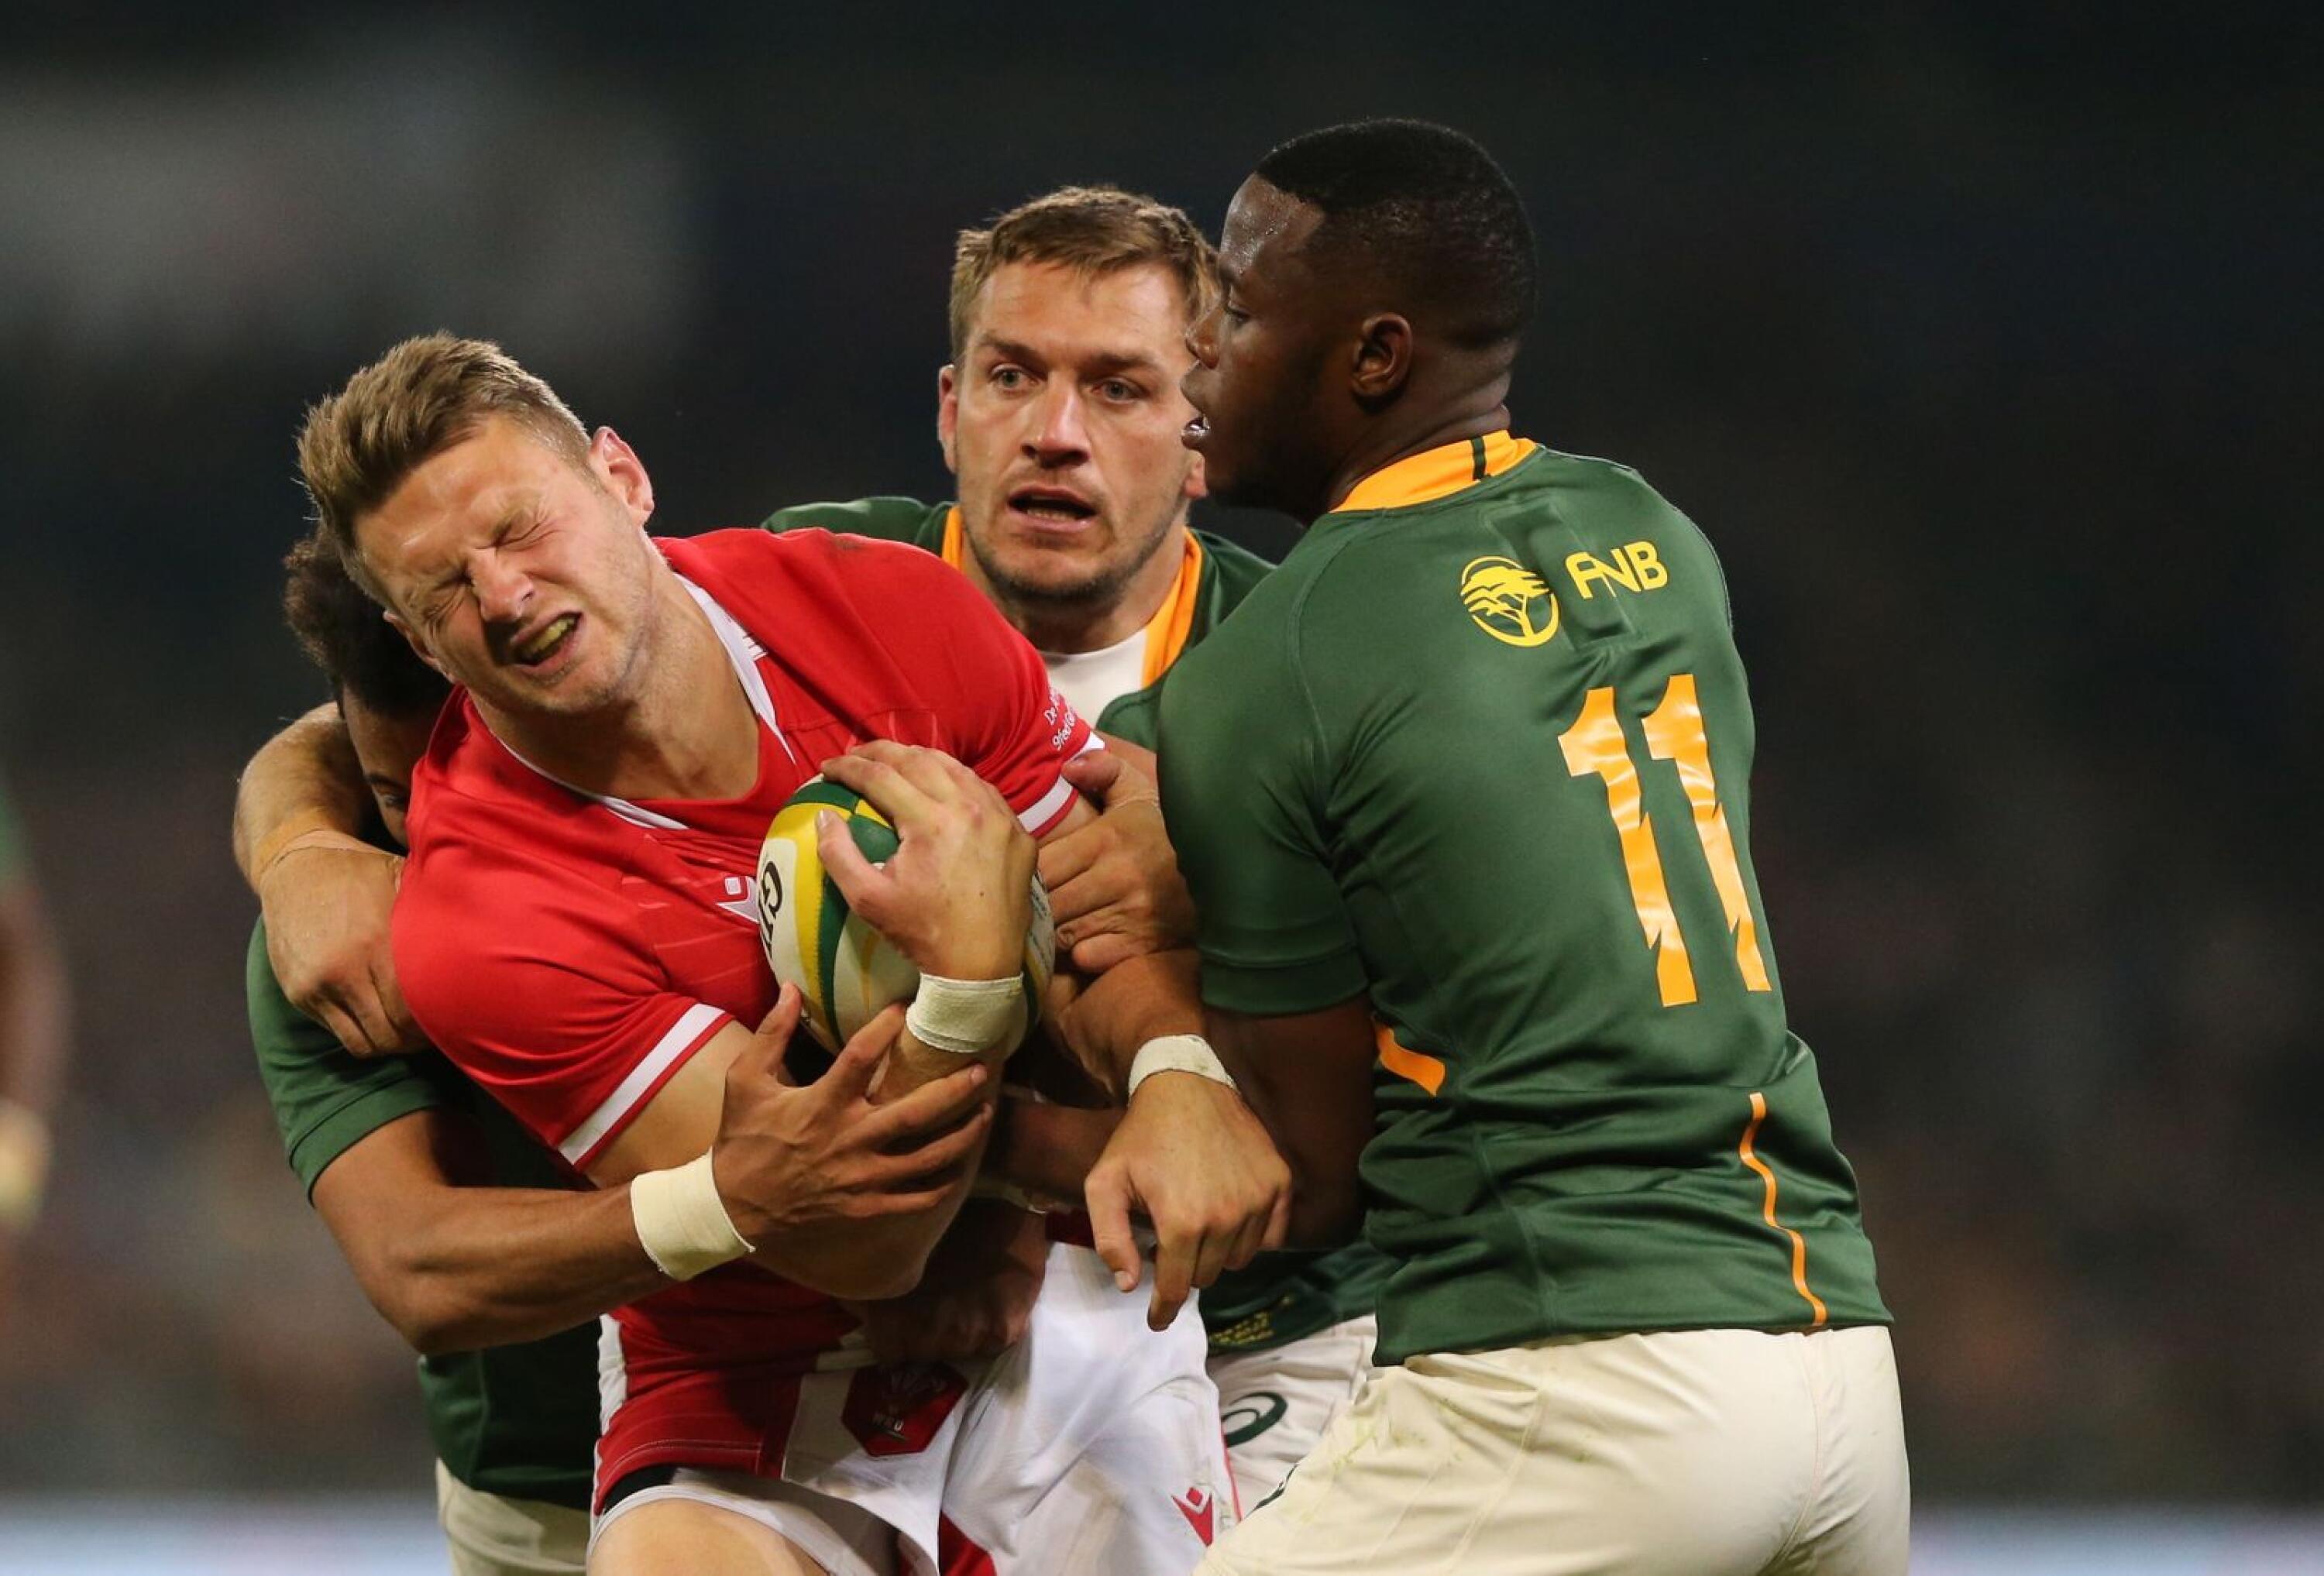 Wales captain Dan Biggar (left) is tackled by Aphelele Fassi of South Africa (right) during the Test match at the Toyota Stadium in Bloemfontein